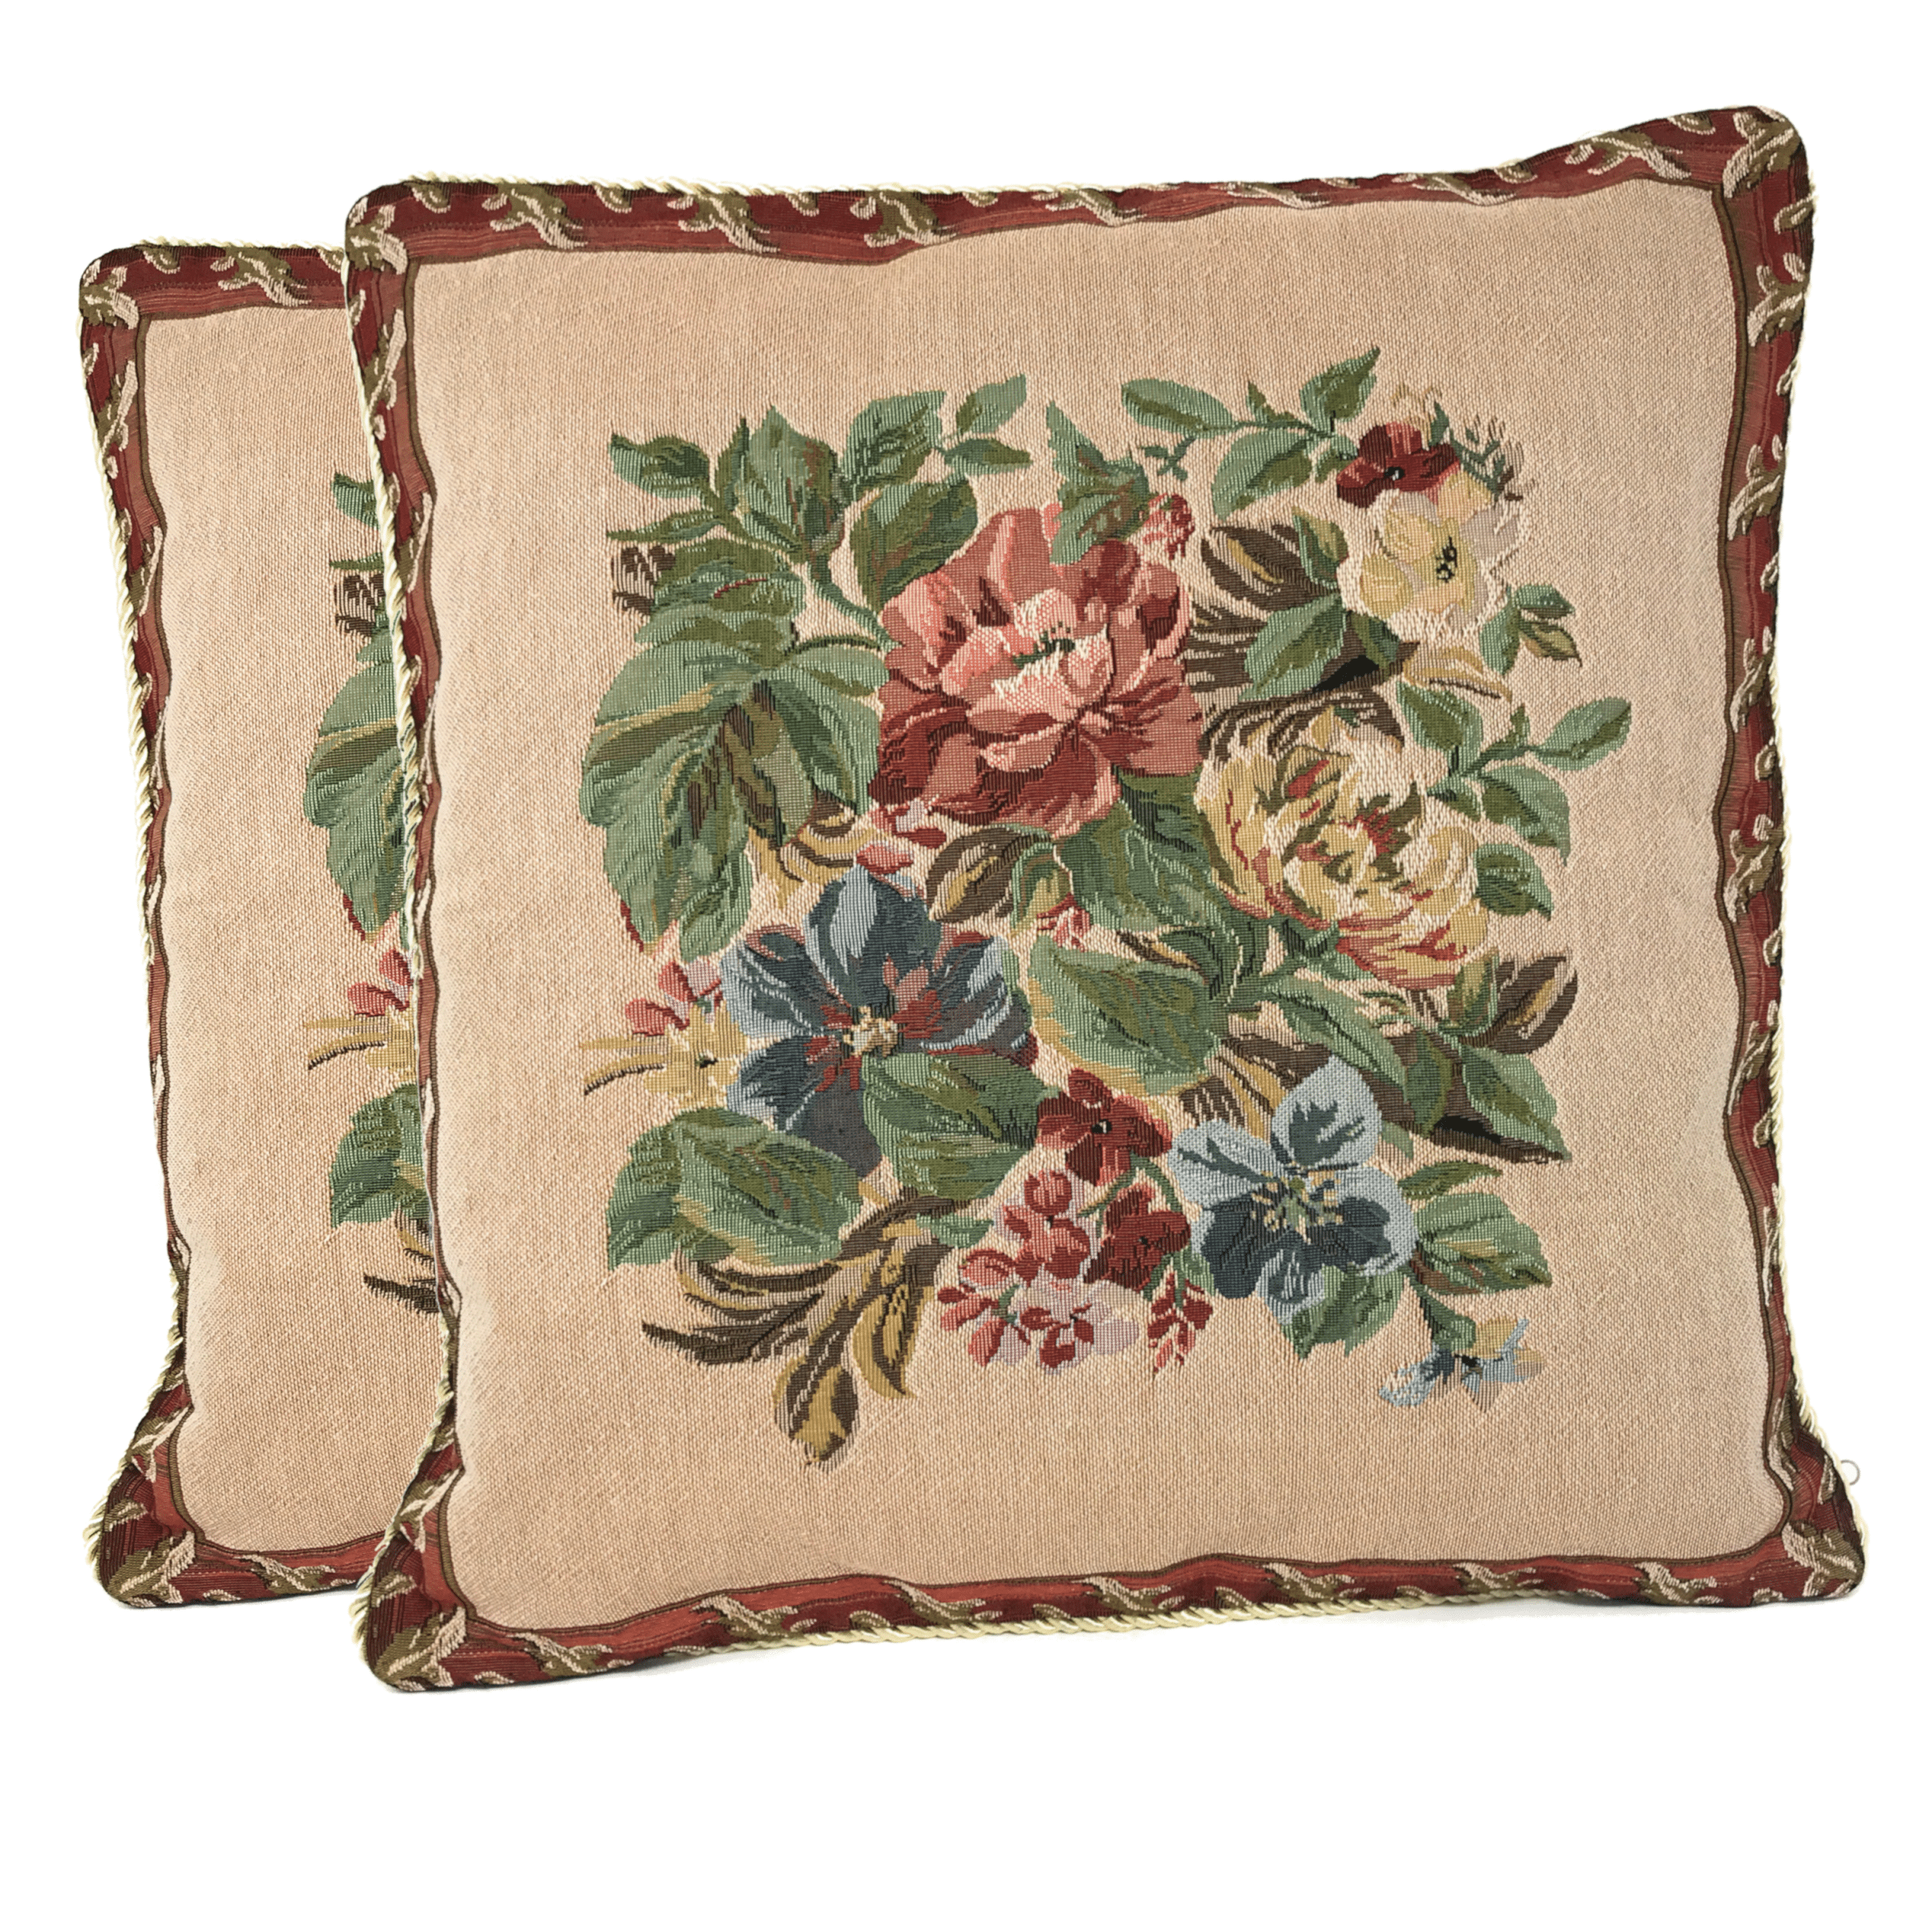 Tache 18 Inch Floral Red Yuletide Blooms Tapestry Throw Pillow Cover (5598)